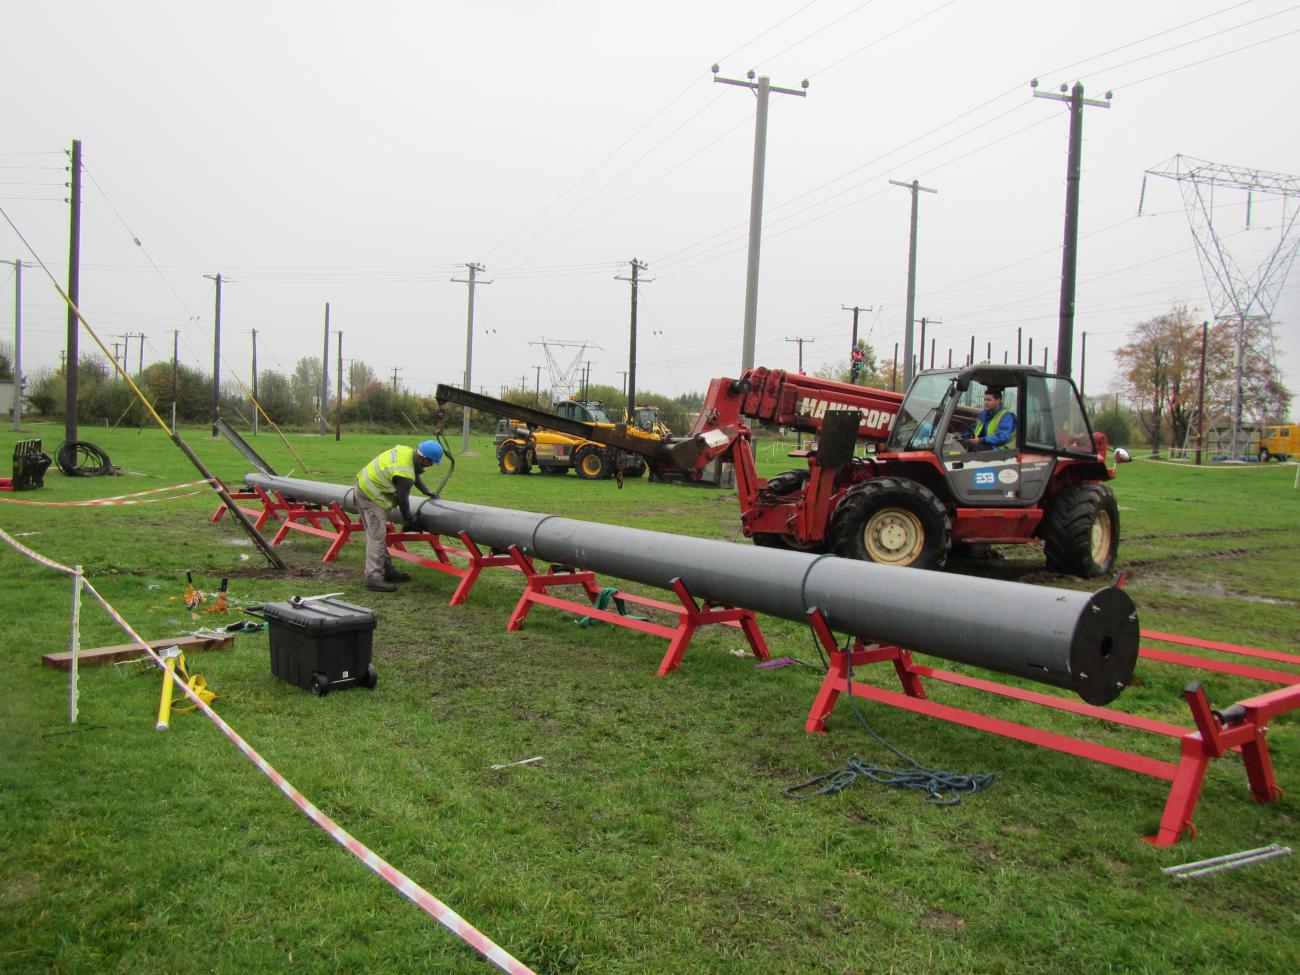 RS pole being assembled